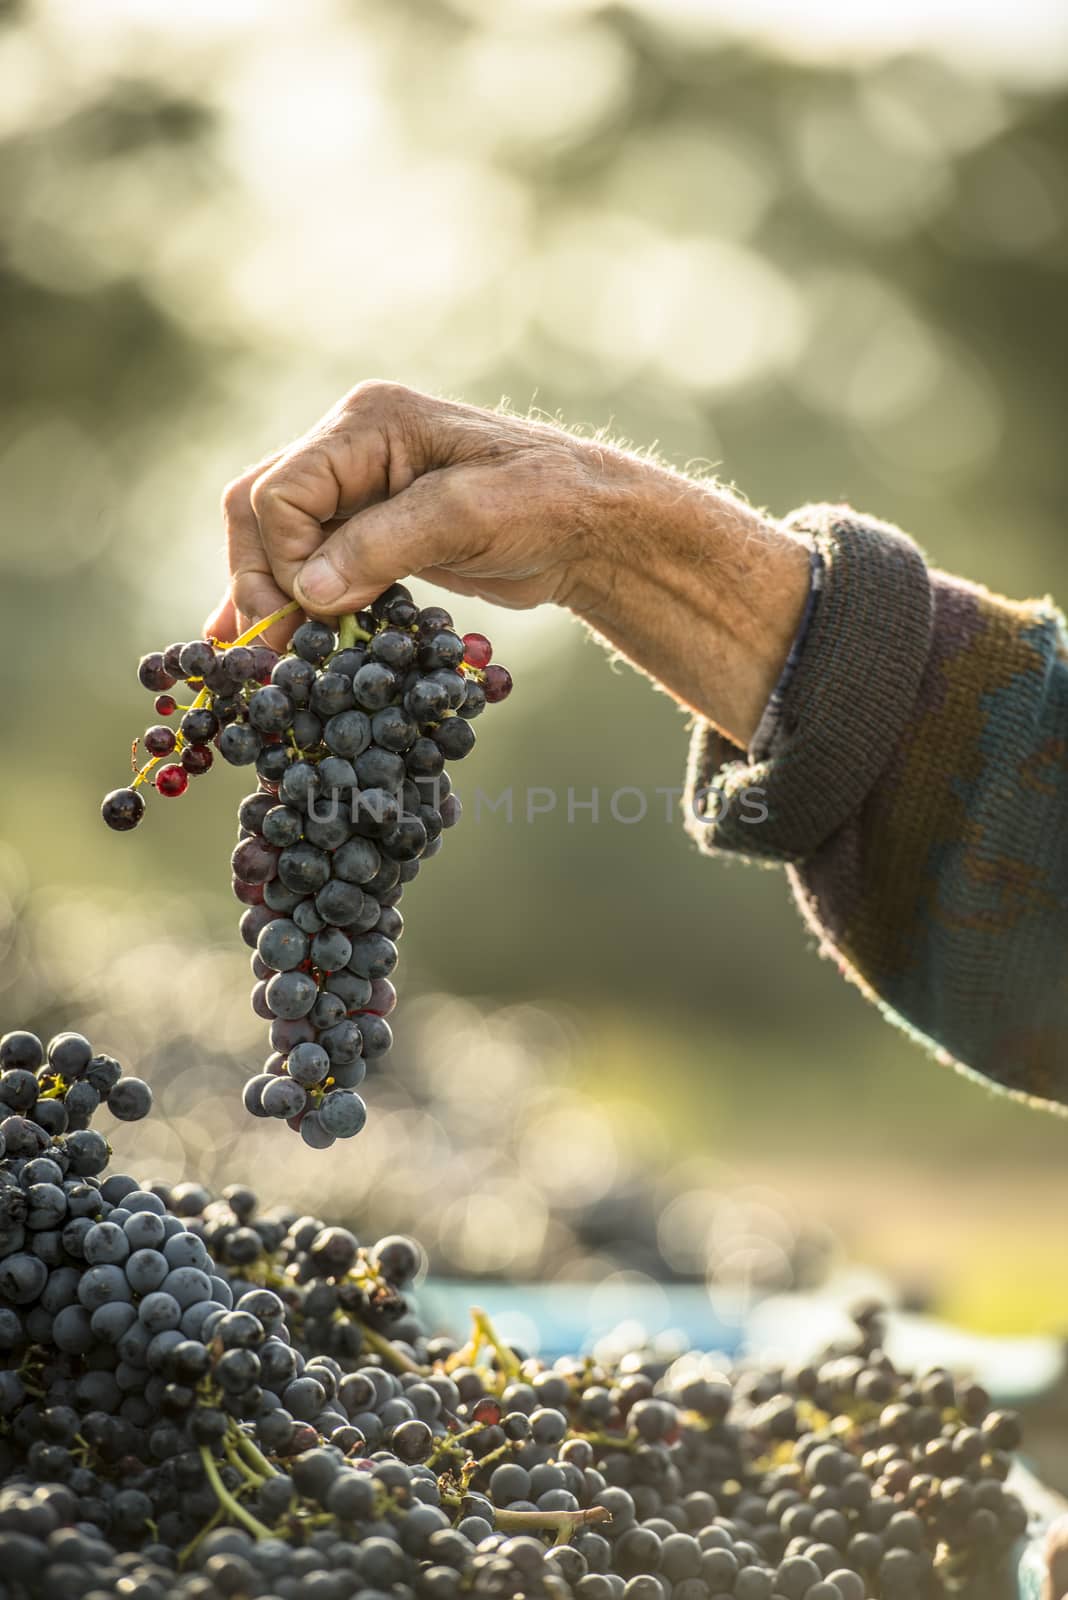 The Wine makers hand holding a freshly picked bunch of grapes.